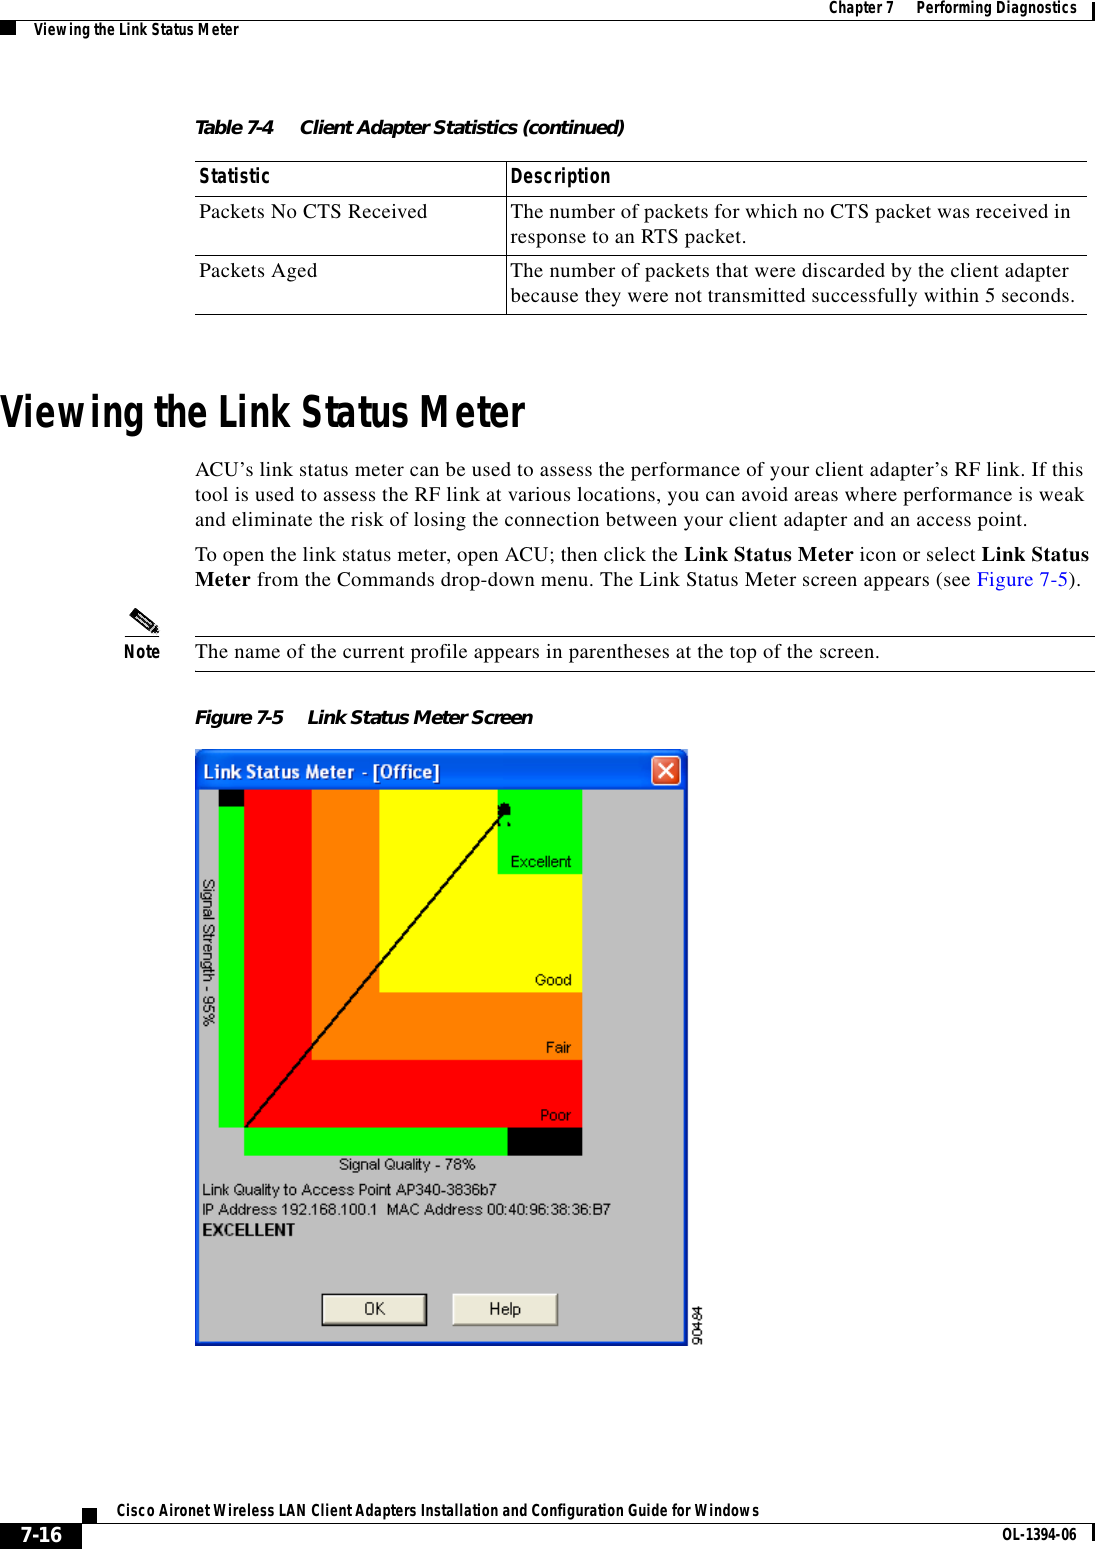 7-16Cisco Aironet Wireless LAN Client Adapters Installation and Configuration Guide for Windows OL-1394-06Chapter 7      Performing DiagnosticsViewing the Link Status MeterViewing the Link Status MeterACU’s link status meter can be used to assess the performance of your client adapter’s RF link. If this tool is used to assess the RF link at various locations, you can avoid areas where performance is weak and eliminate the risk of losing the connection between your client adapter and an access point.To open the link status meter, open ACU; then click the Link Status Meter icon or select Link Status Meter from the Commands drop-down menu. The Link Status Meter screen appears (see Figure 7-5).Note The name of the current profile appears in parentheses at the top of the screen.Figure 7-5 Link Status Meter ScreenPackets No CTS Received The number of packets for which no CTS packet was received in response to an RTS packet.Packets Aged The number of packets that were discarded by the client adapter because they were not transmitted successfully within 5 seconds.Table 7-4 Client Adapter Statistics (continued)Statistic Description